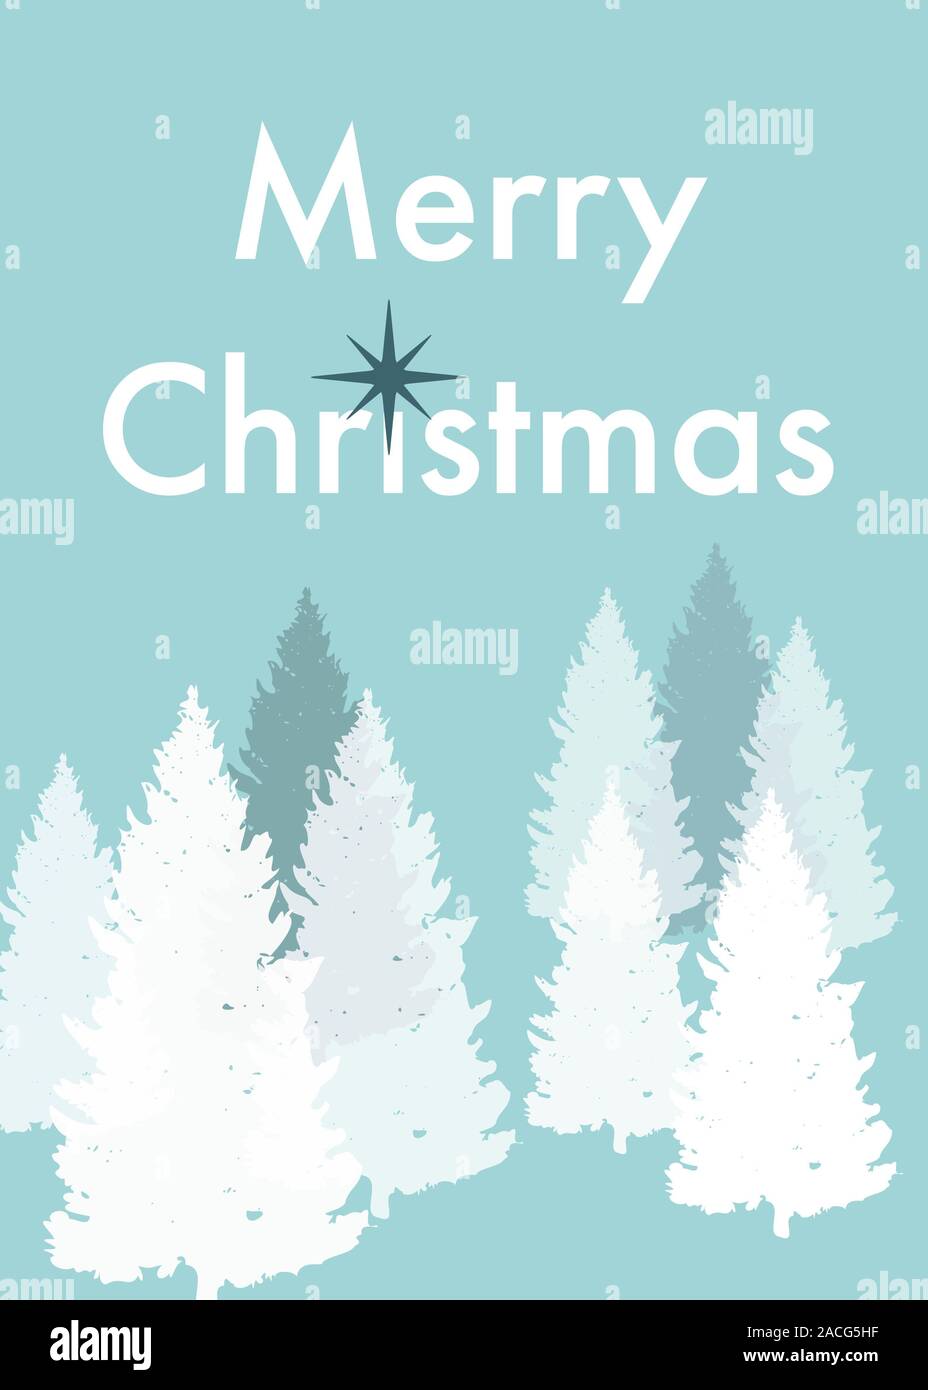 Merry Christmas Illustration Teal Trees and forest Stock Photo